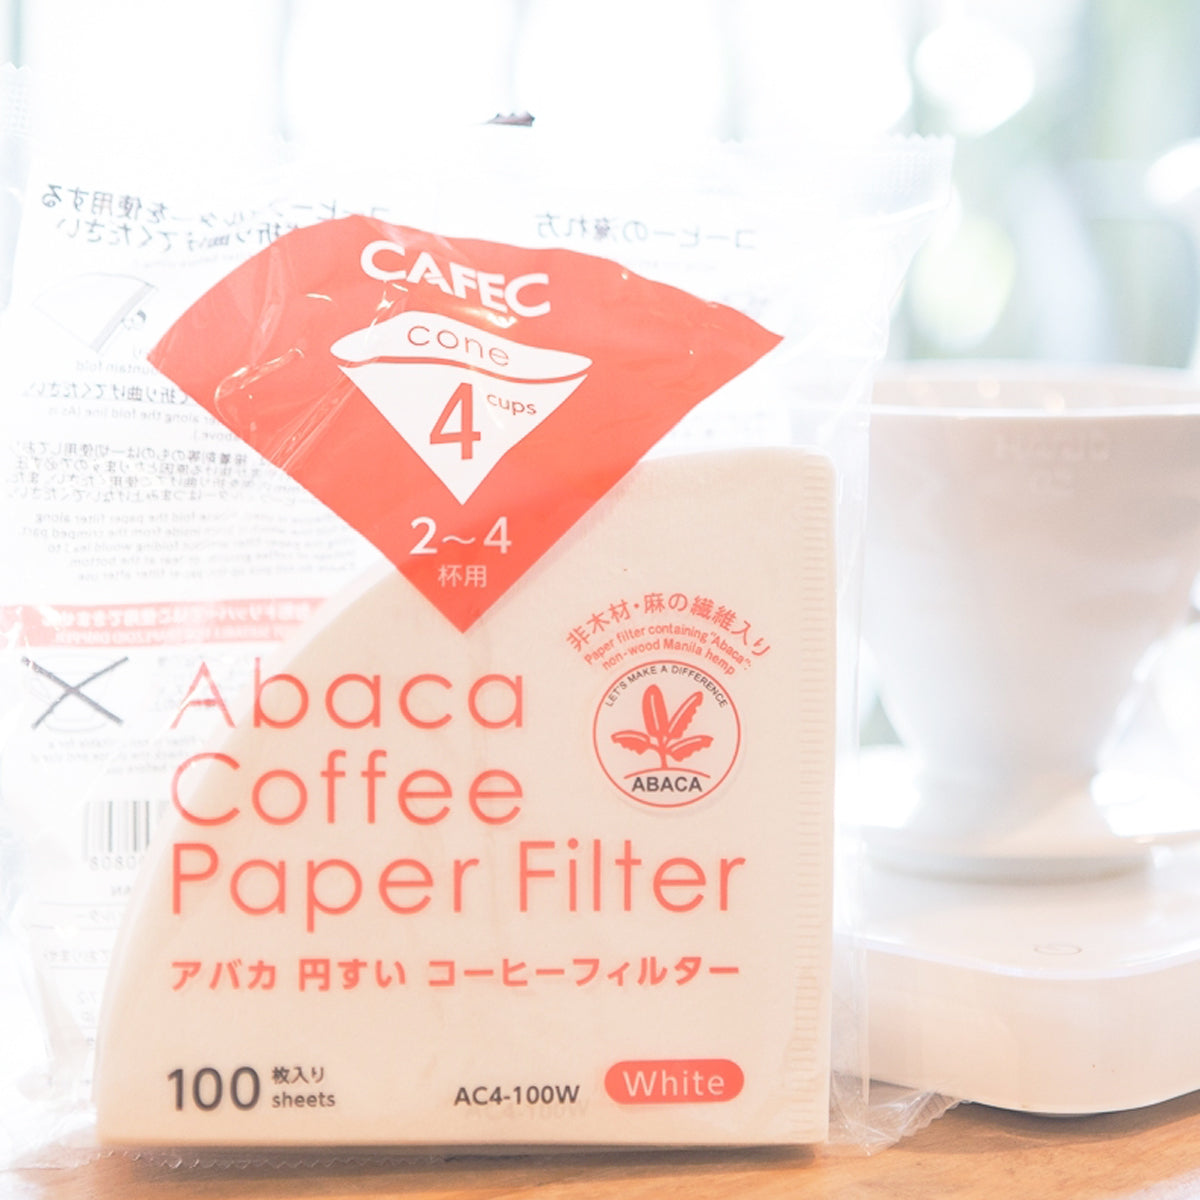 Cafec Coffee Filter - 4 cups (Cone Shape)